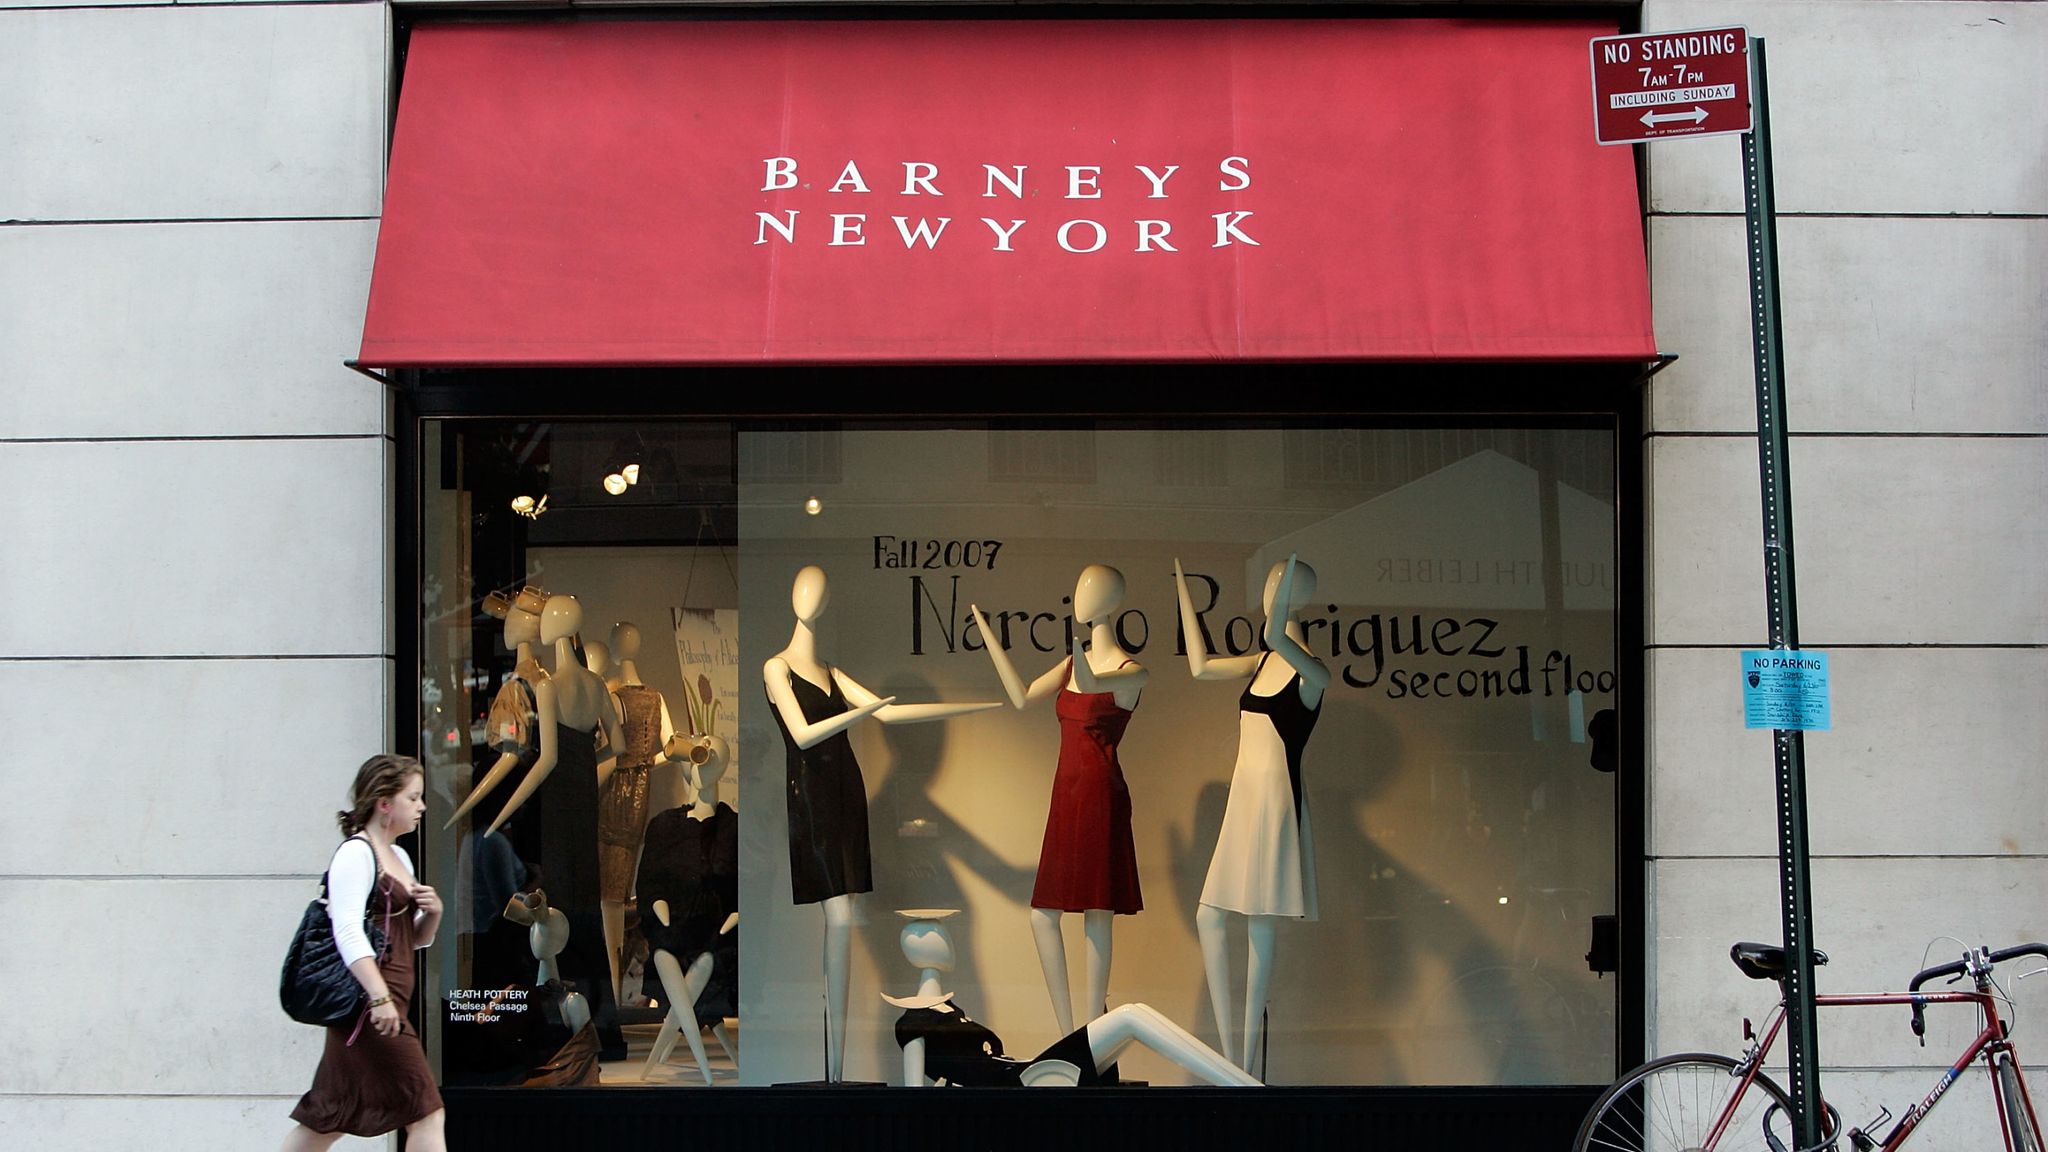 Barneys New York flagship will have rent doubled to $30M